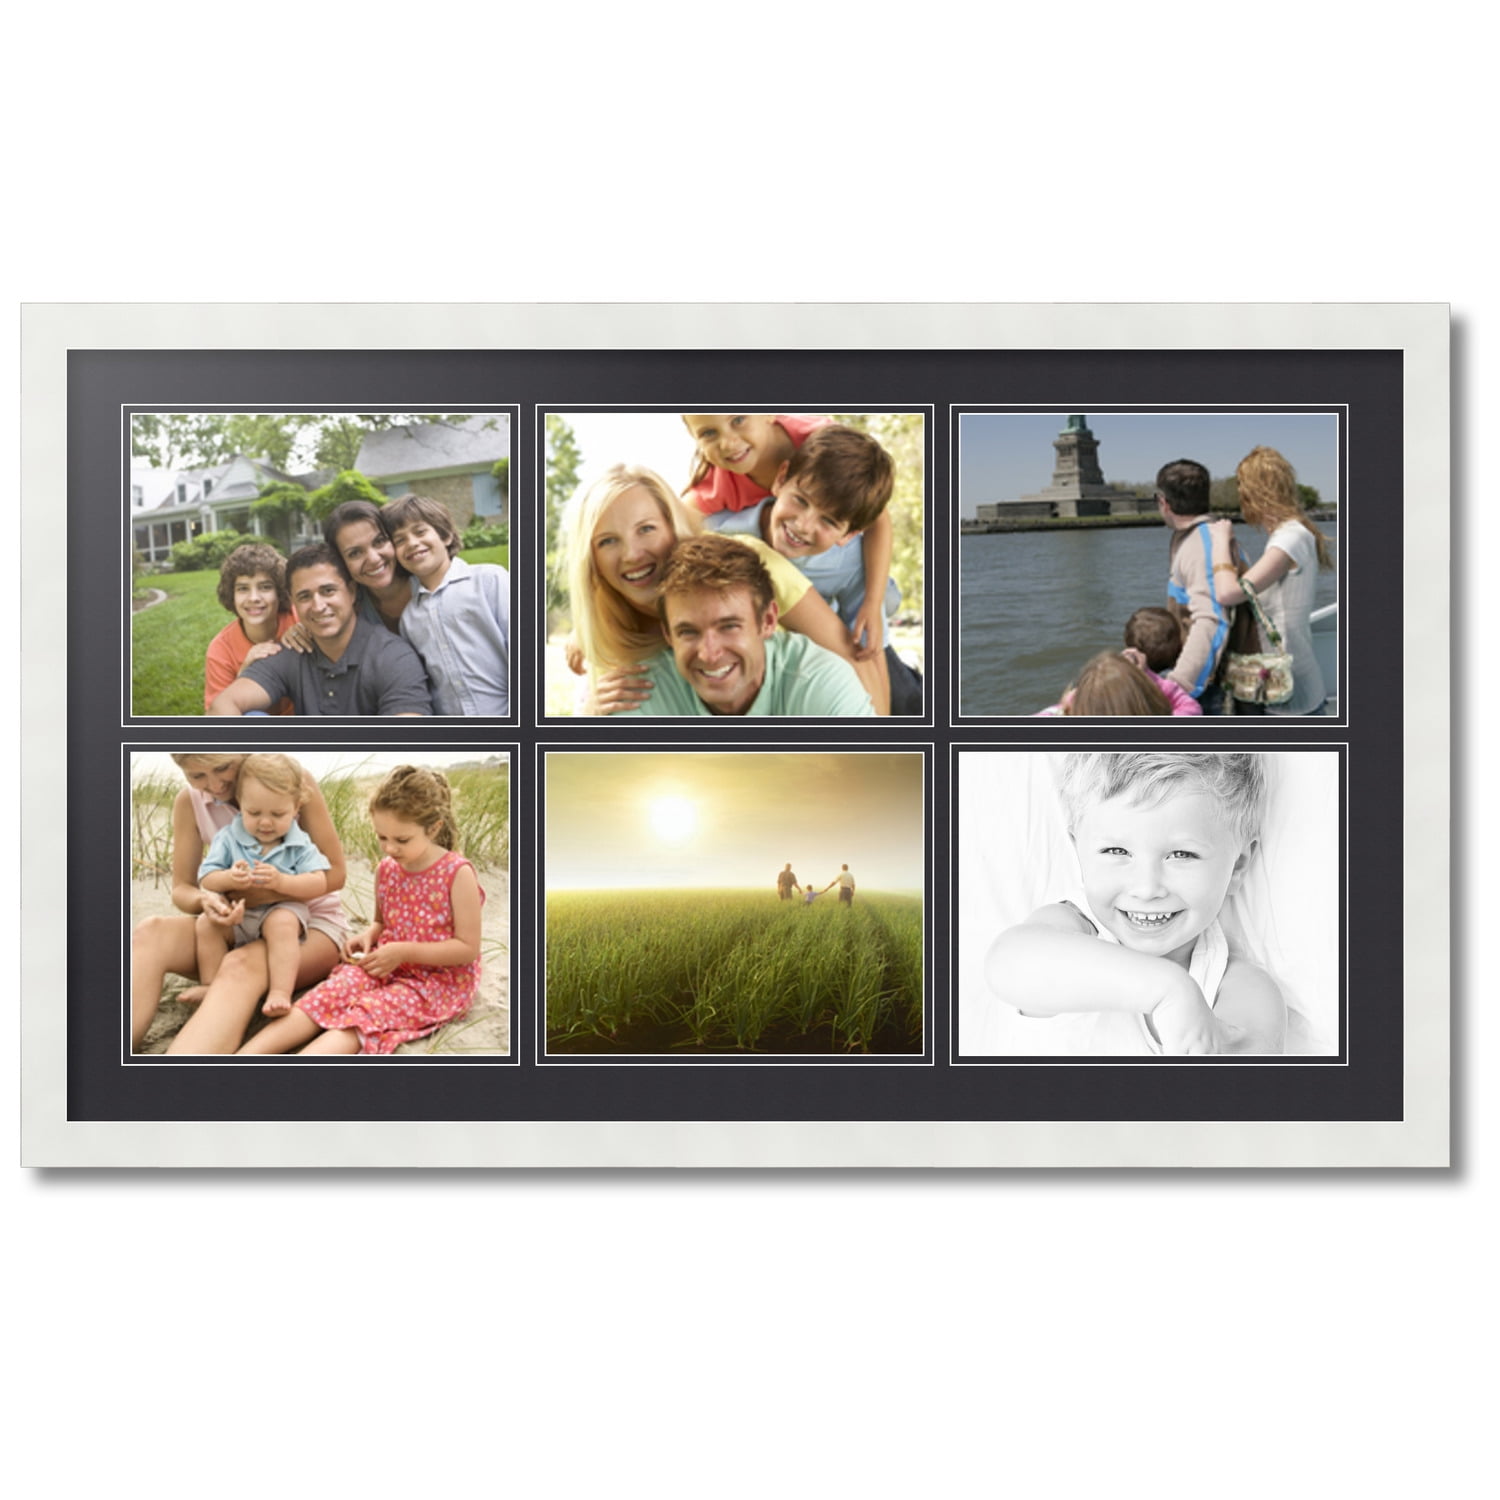 Large Multi Photo Picture Frame Holds 6 8x10 Photos in a 33mm Black Wood  Frame 